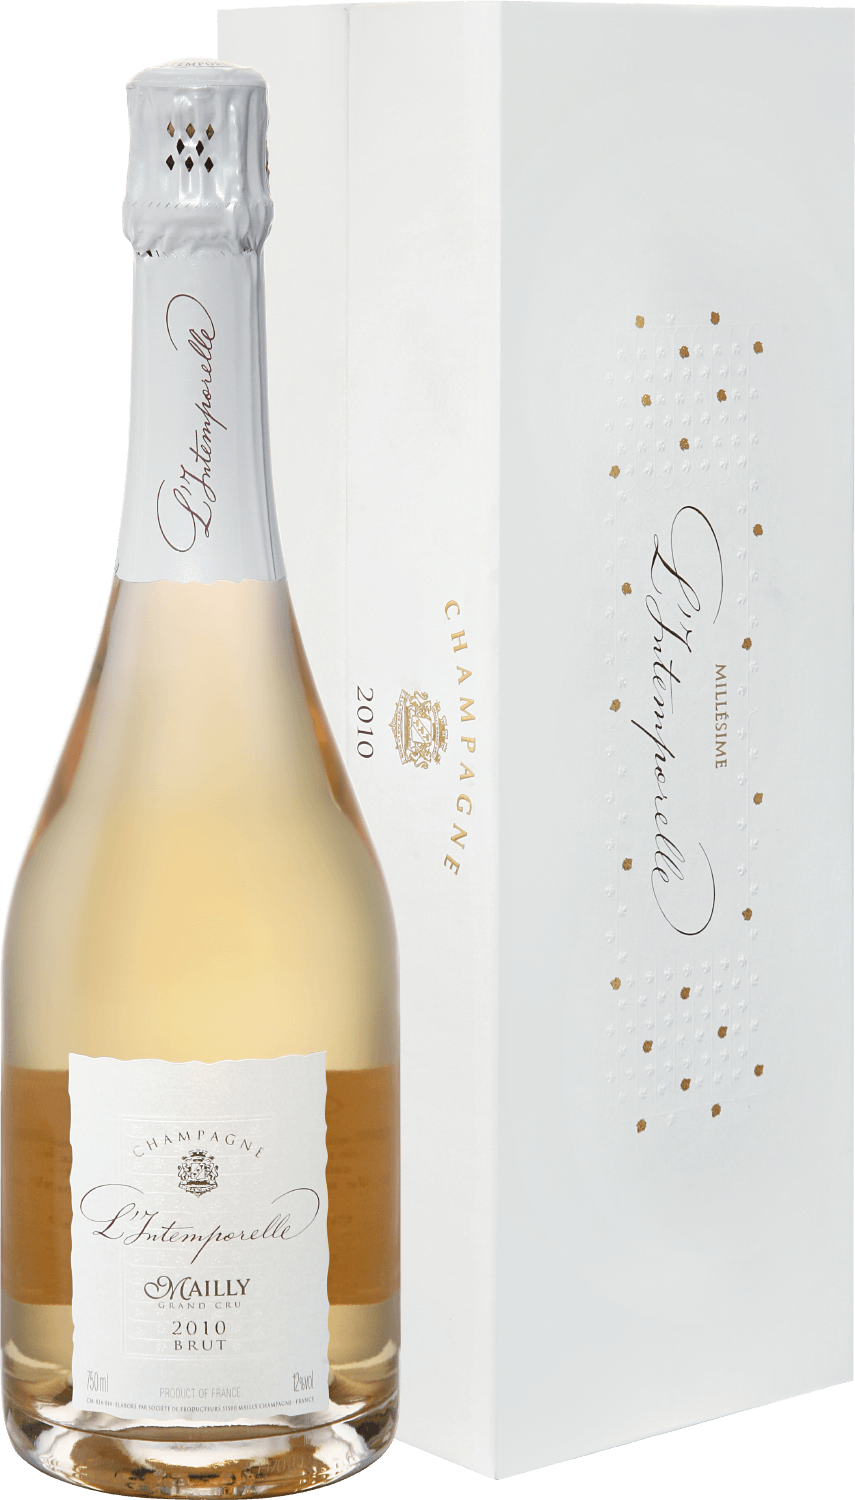 mailly grand cru brut blanc de pinot noir champagne аос Mailly Grand Cru L’intemporelle Brut Millesime Champagne АОС (gift box)